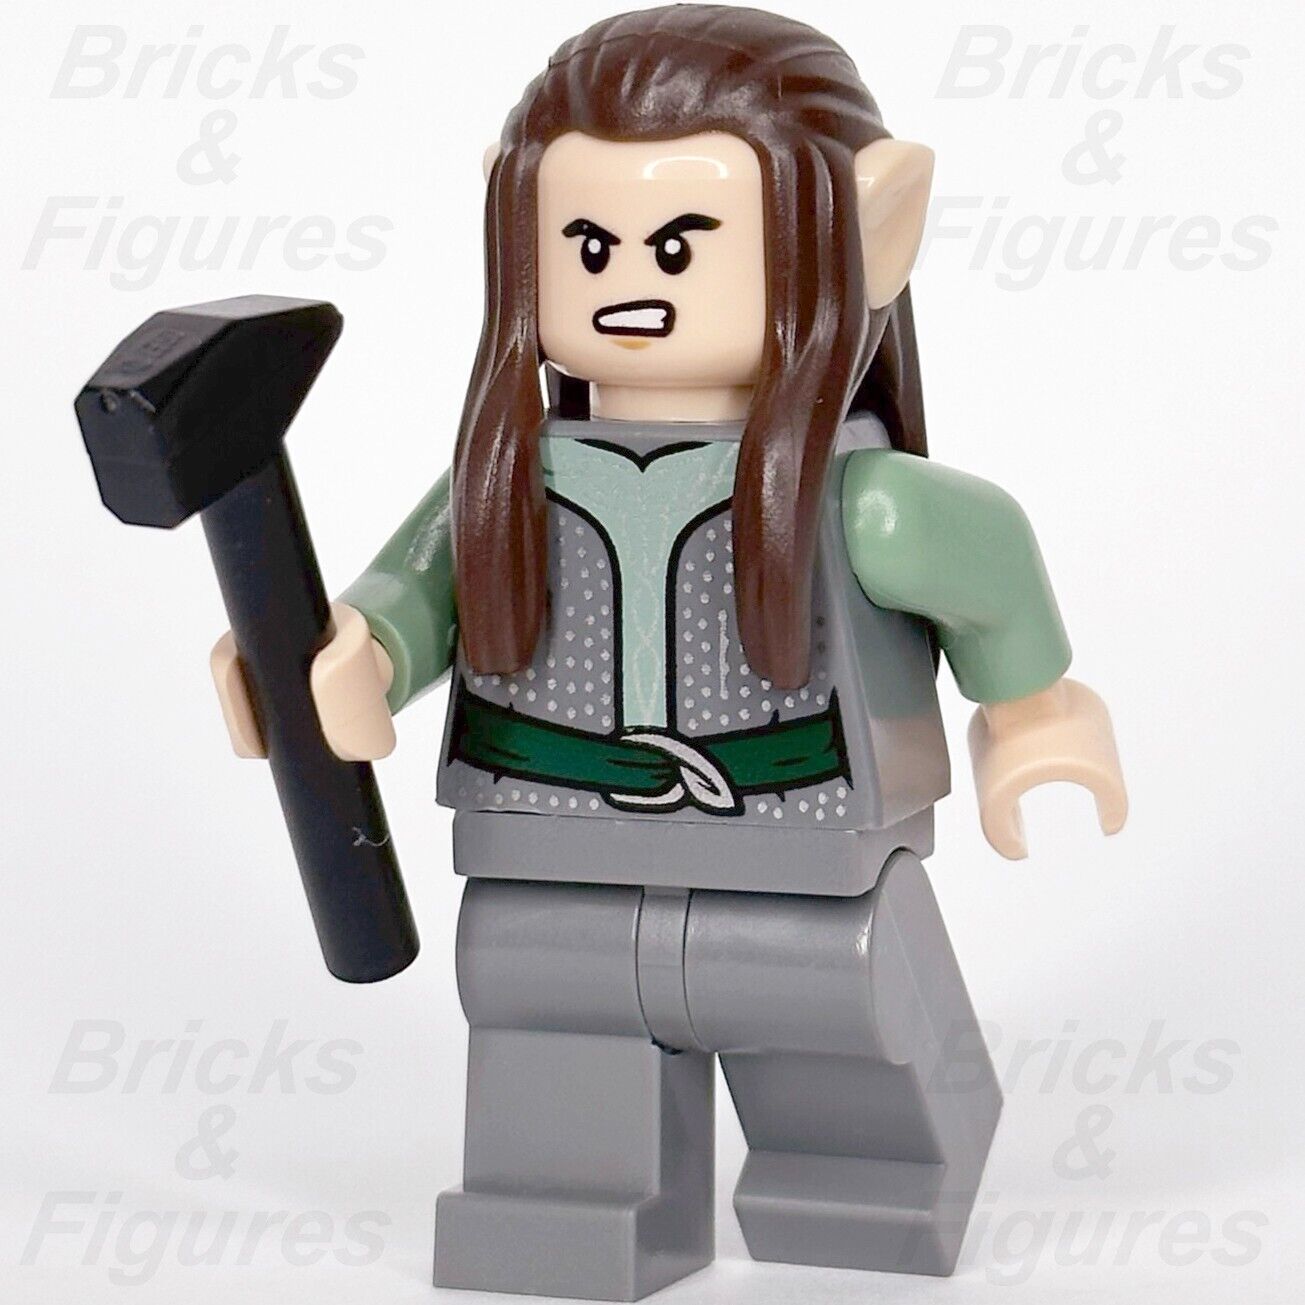 LEGO Rivendell Elf Minifigure The Hobbit & The Lord of the Rings 10316 lor122 - Bricks & Figures